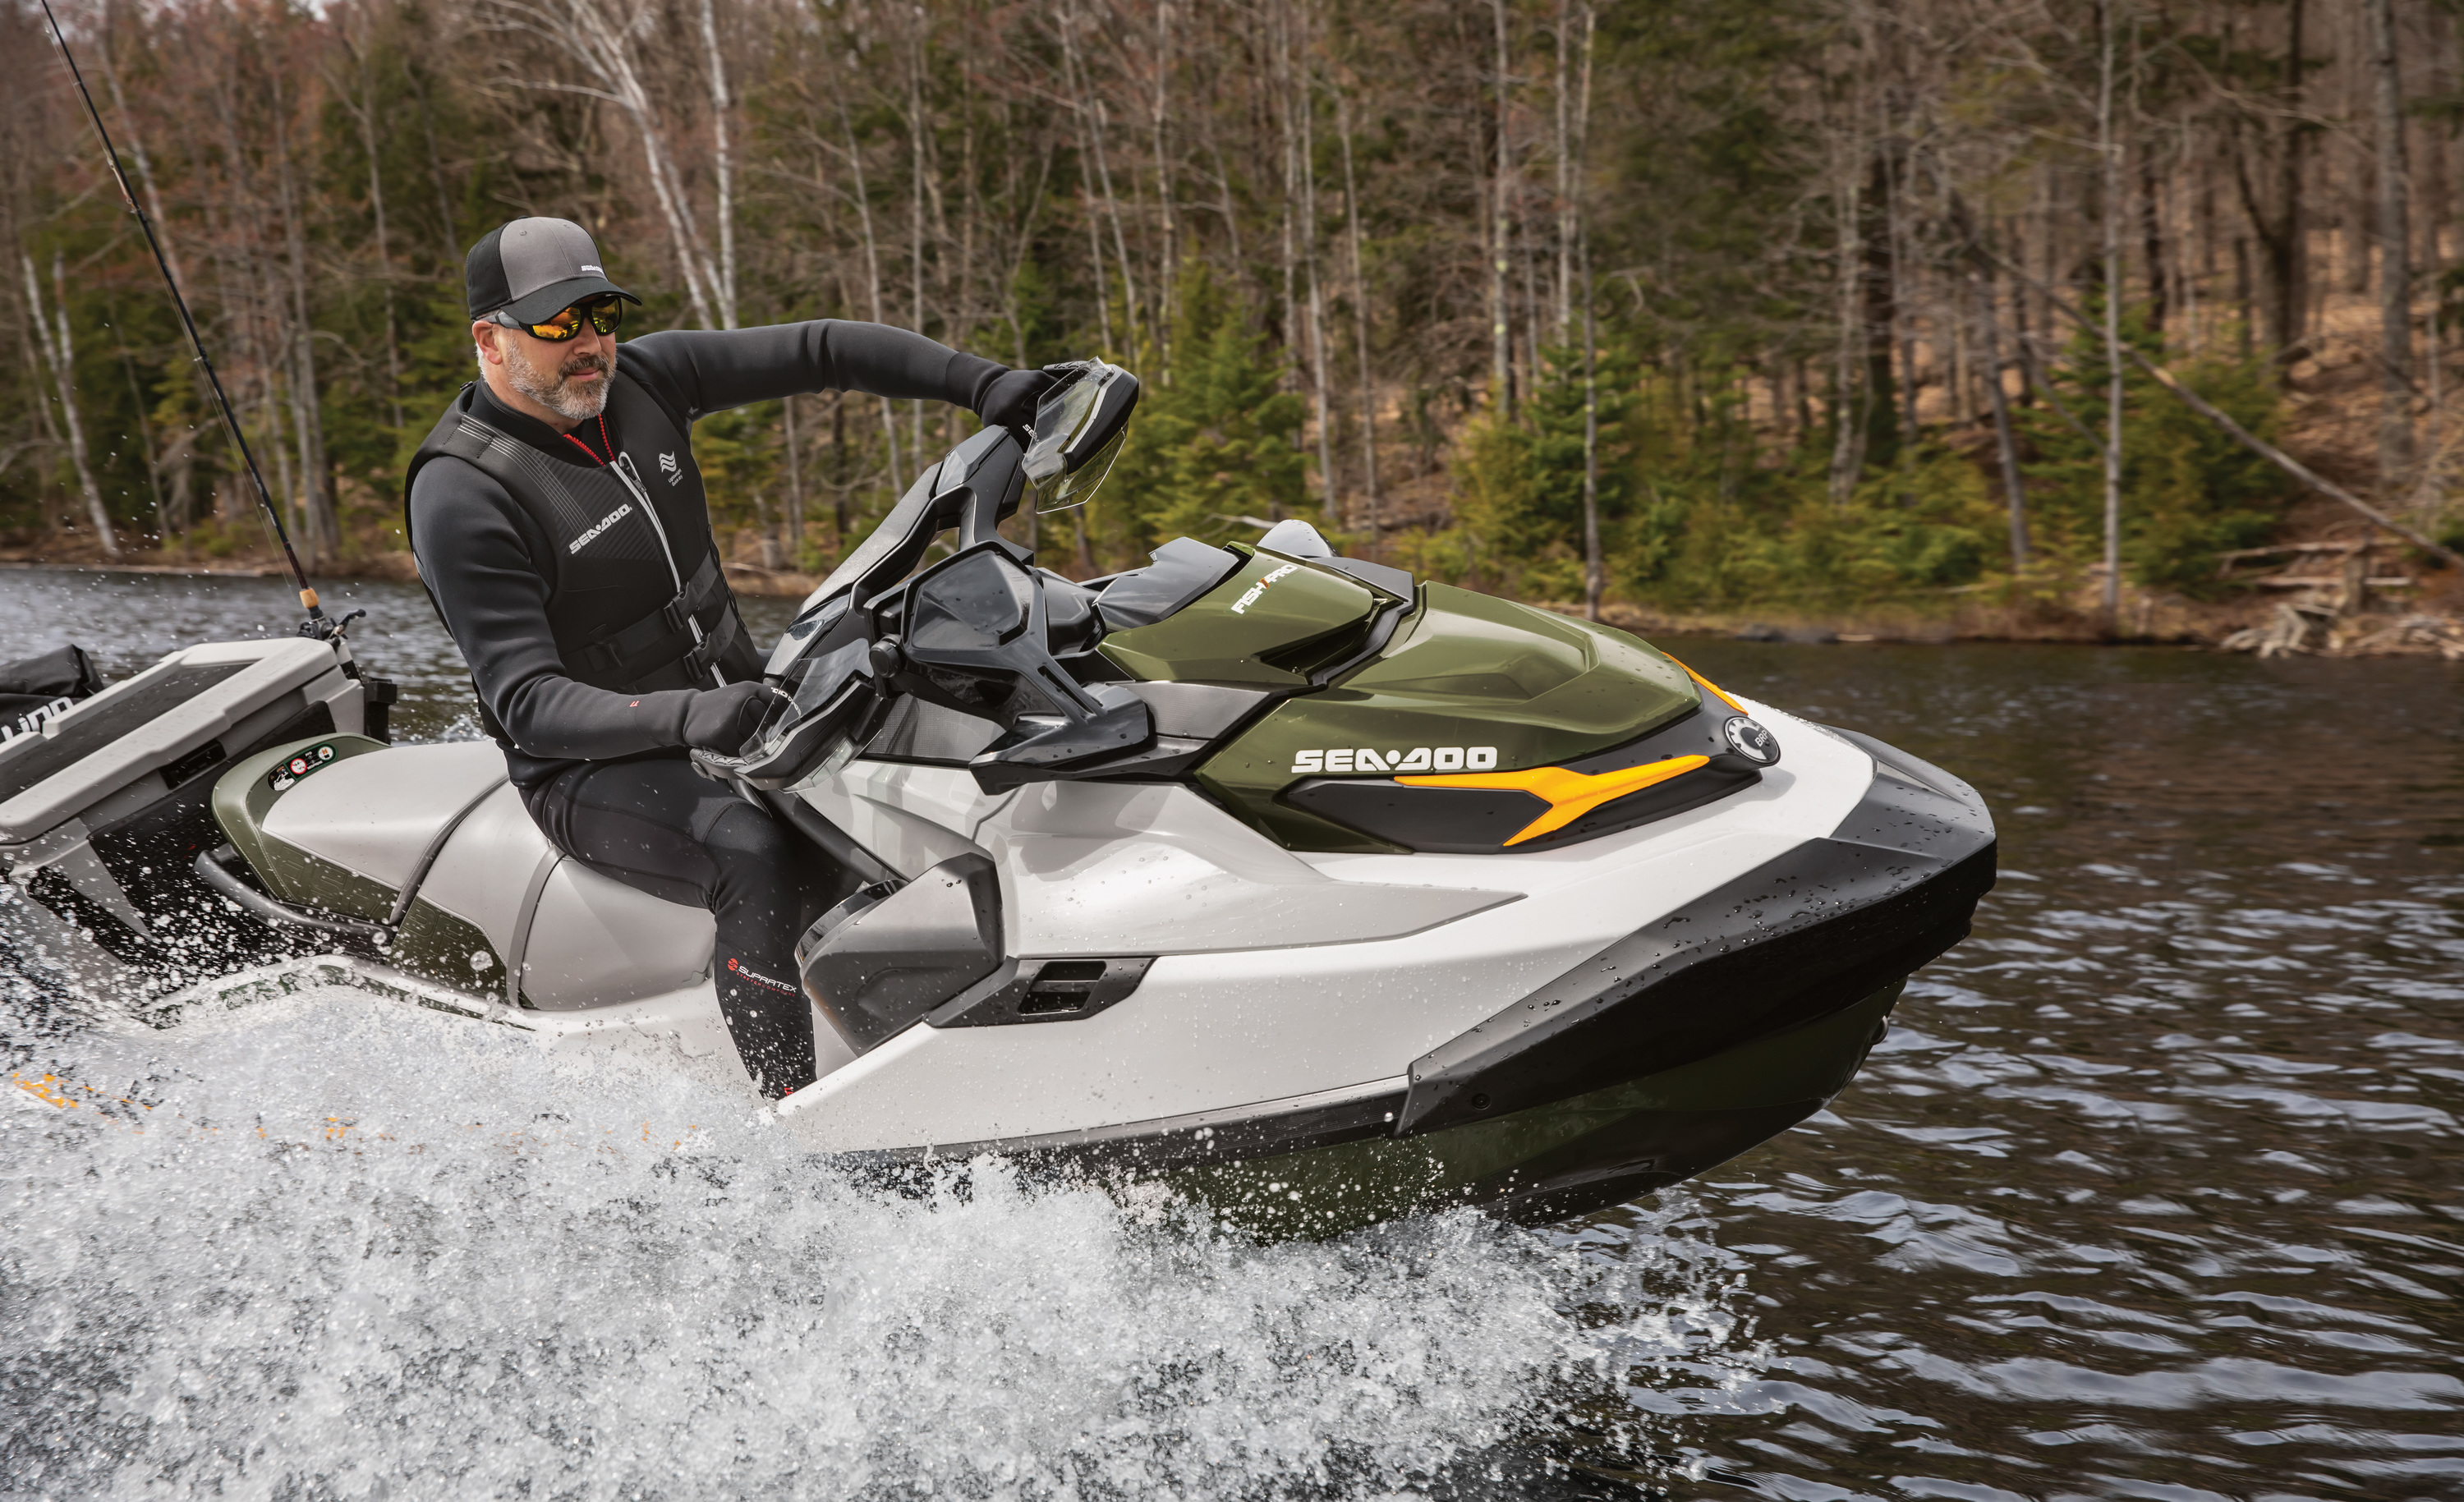 Sea Doo Fish Pro 170 with Garmin GPS and cooler in green and white